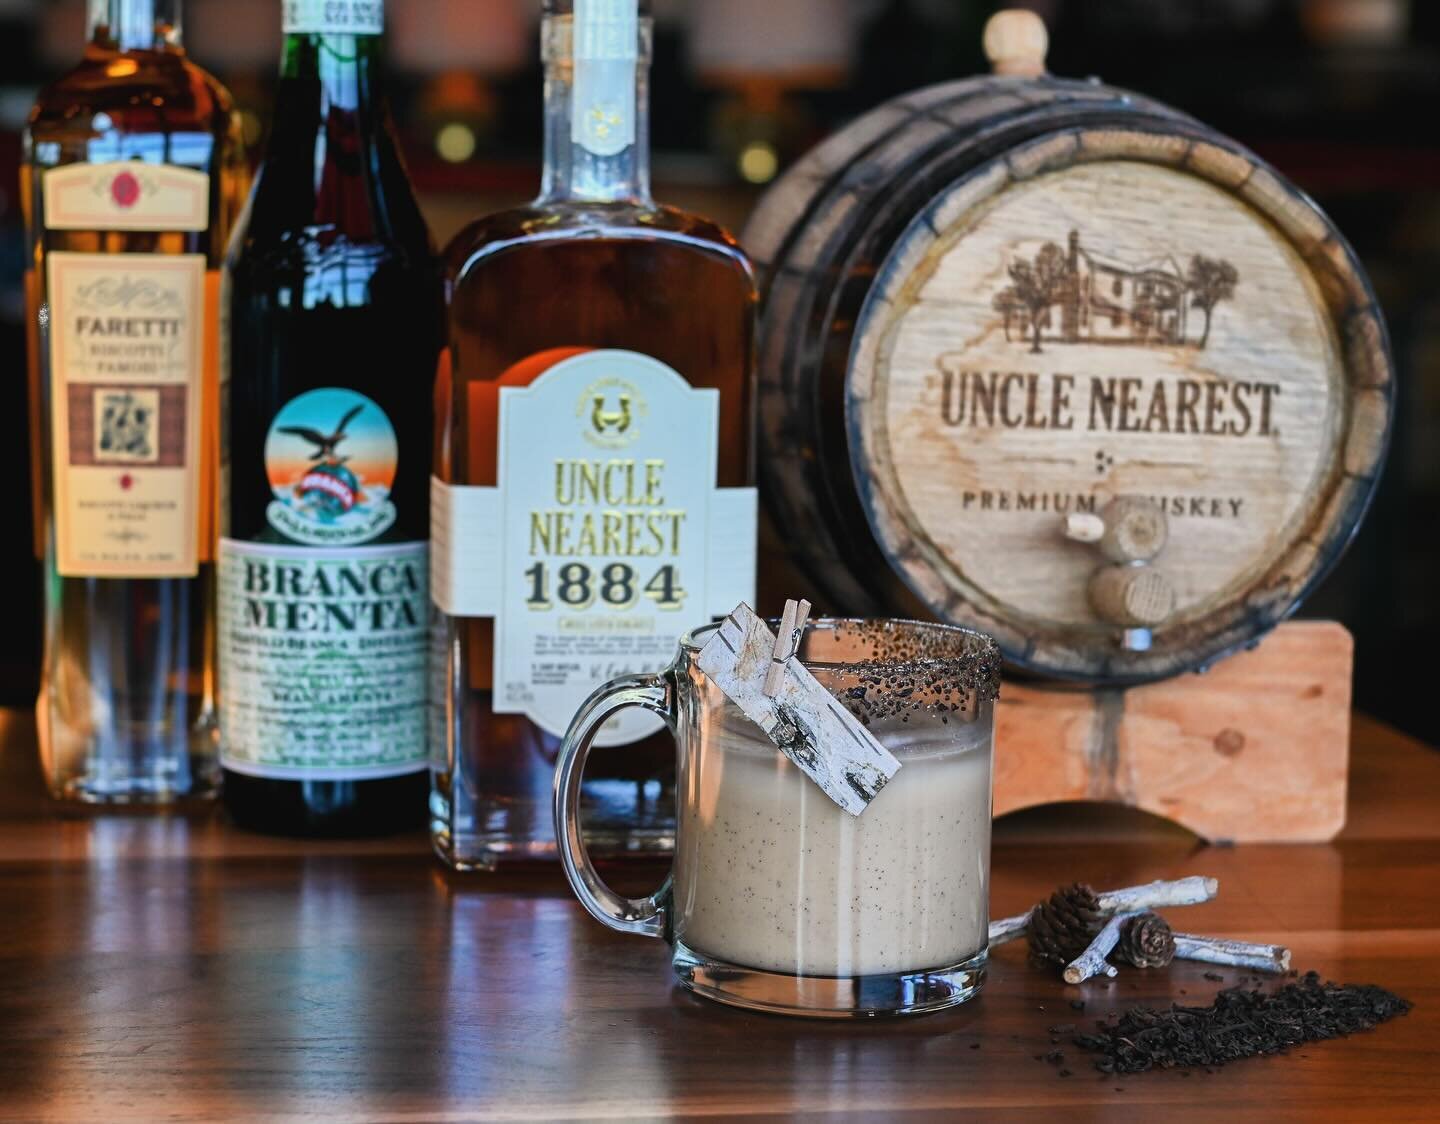 We want to continue to highlight Uncle Nearest because of the incredible partnership we continue to have. Hard Nog Life is just one of several cocktails we have done with this amazing brand and we cannot wait to show you what&rsquo;s next for our Spr